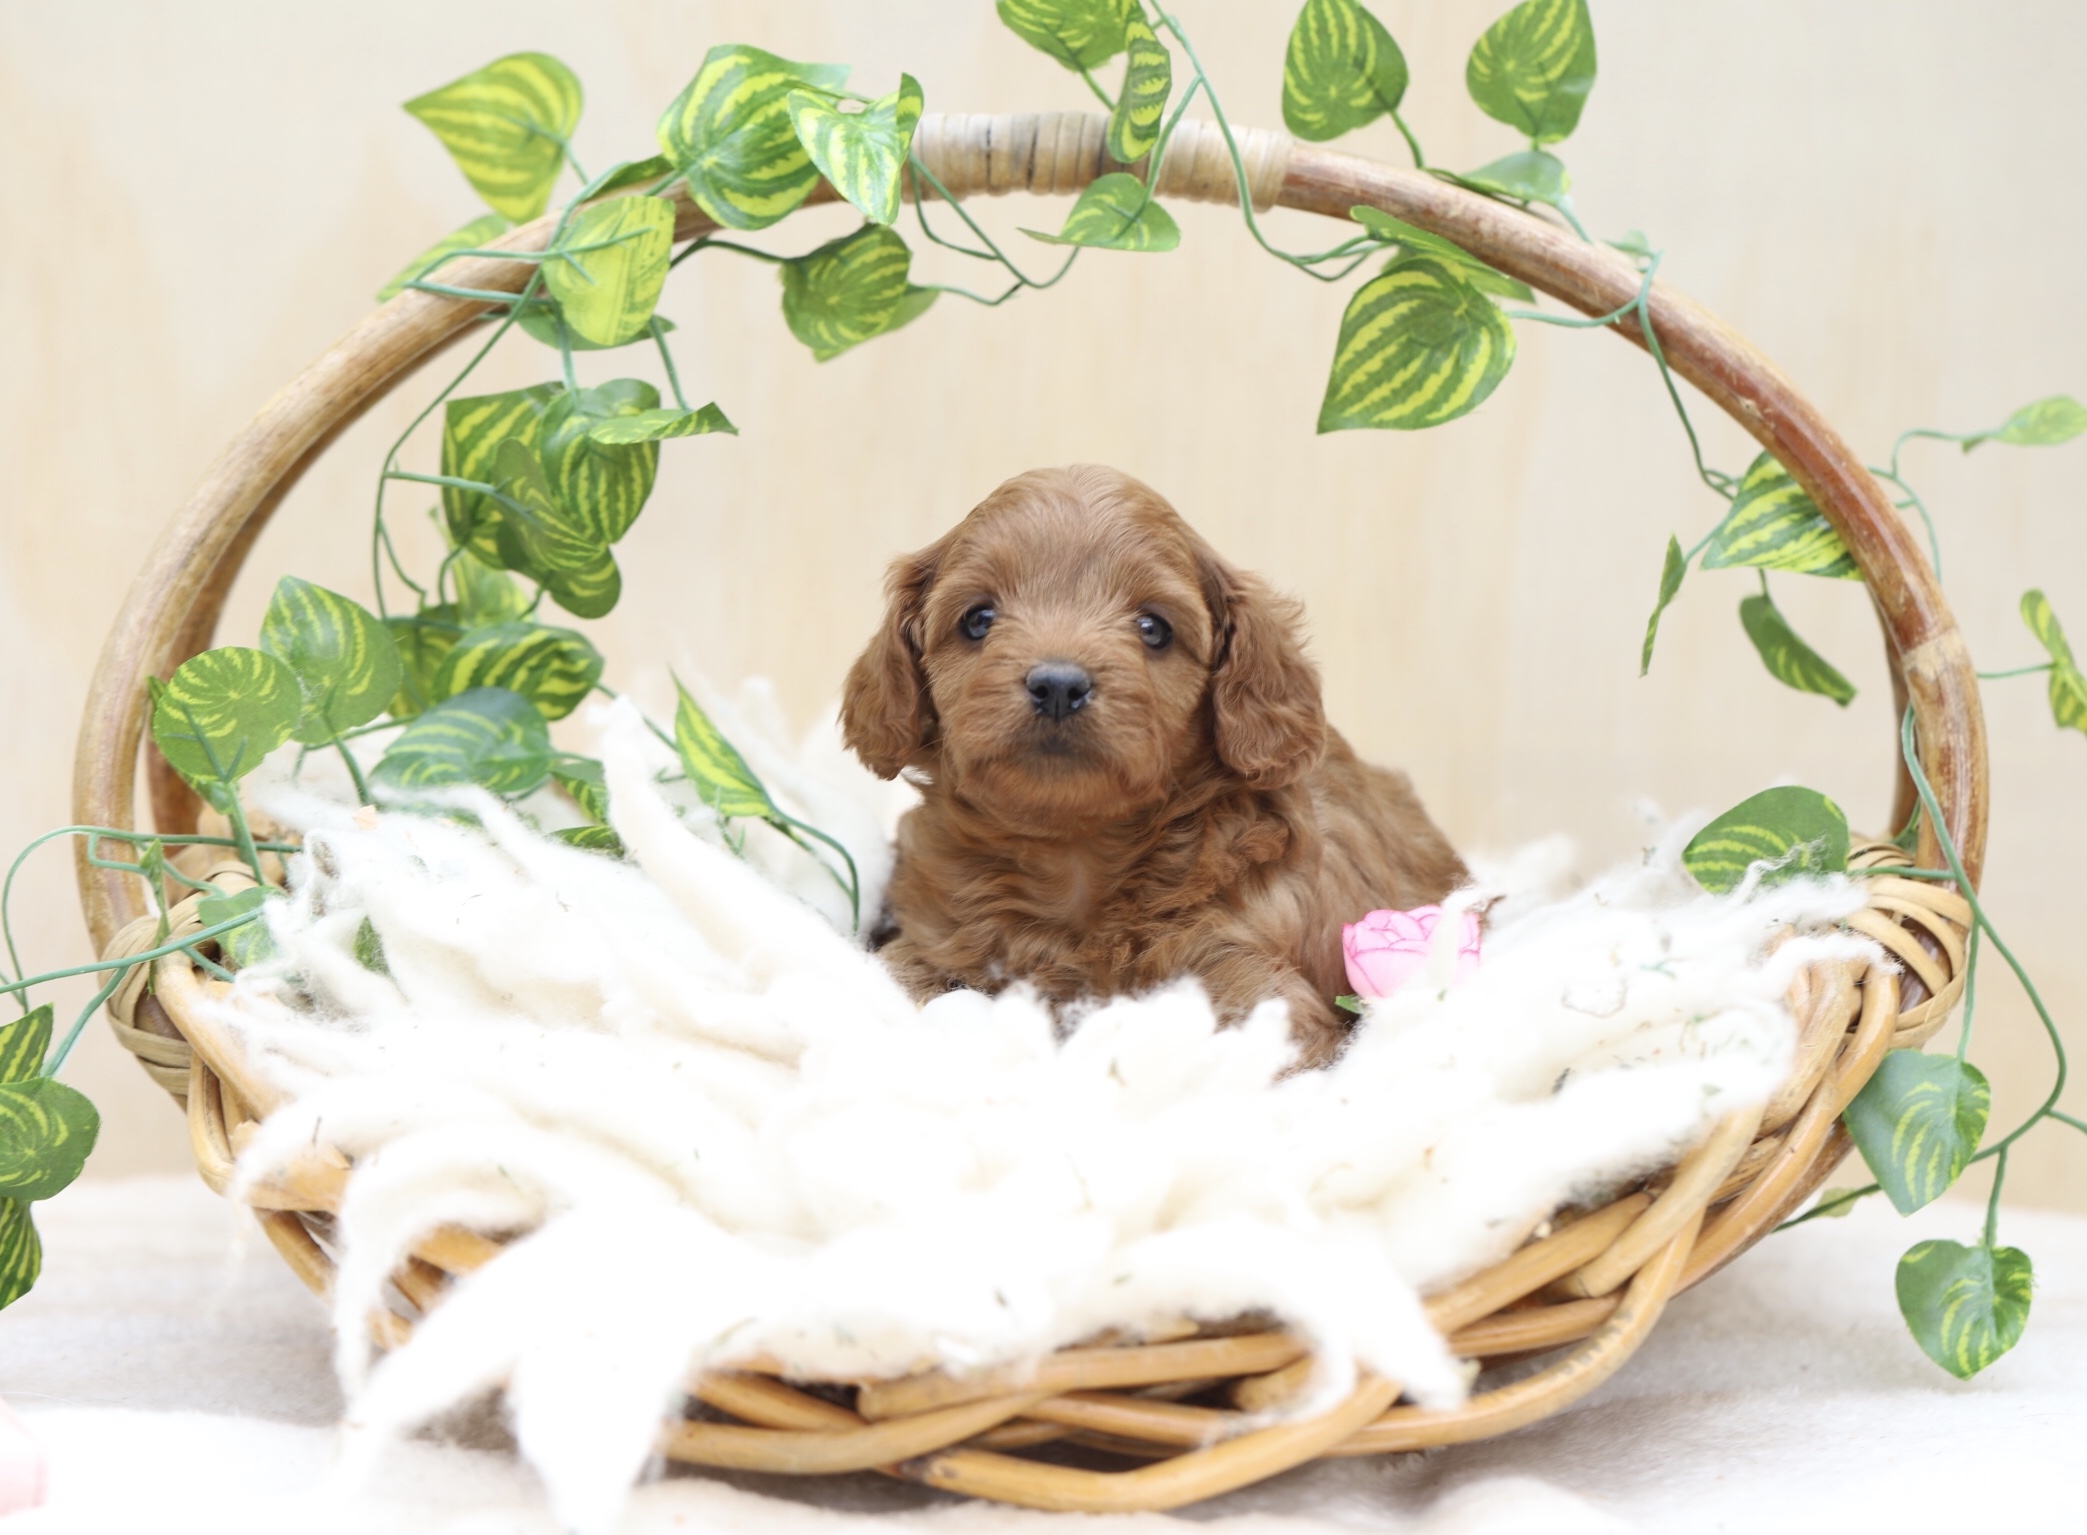 ethical breeder of cavoodles